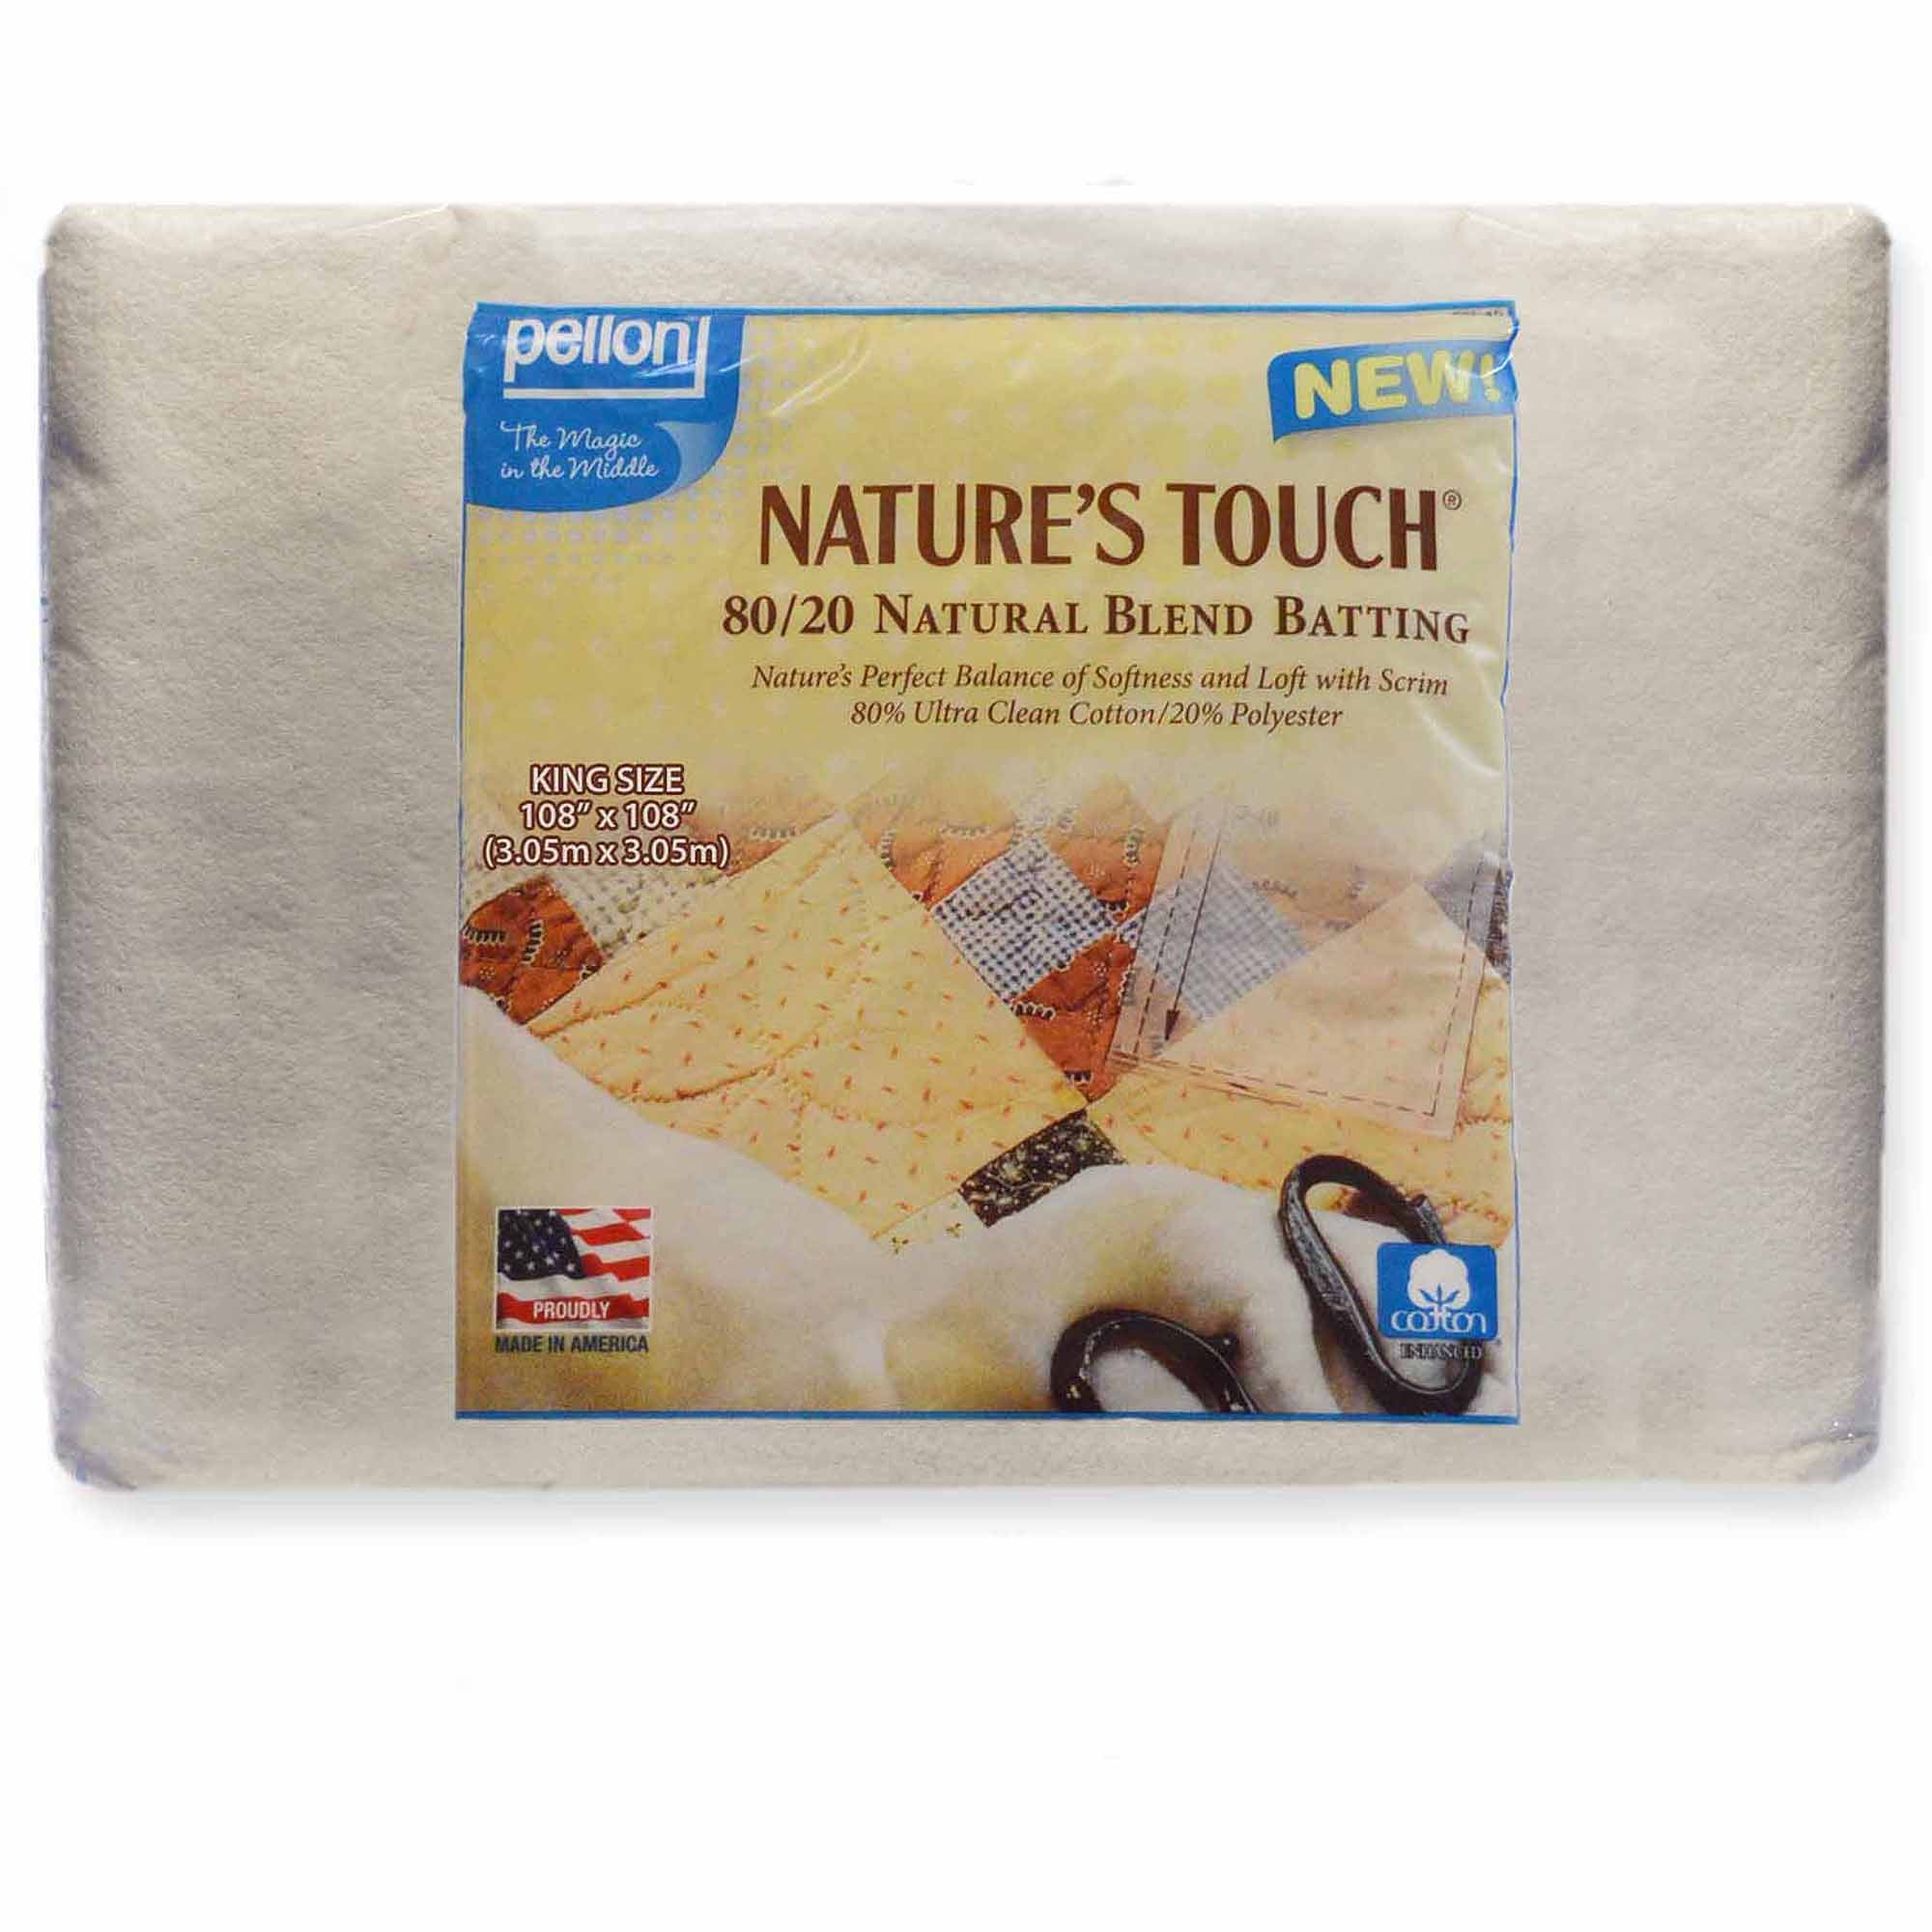 10 yd 120" Wide Pellon Natures Touch Natural Blend 80/20 Batting with Scrim 